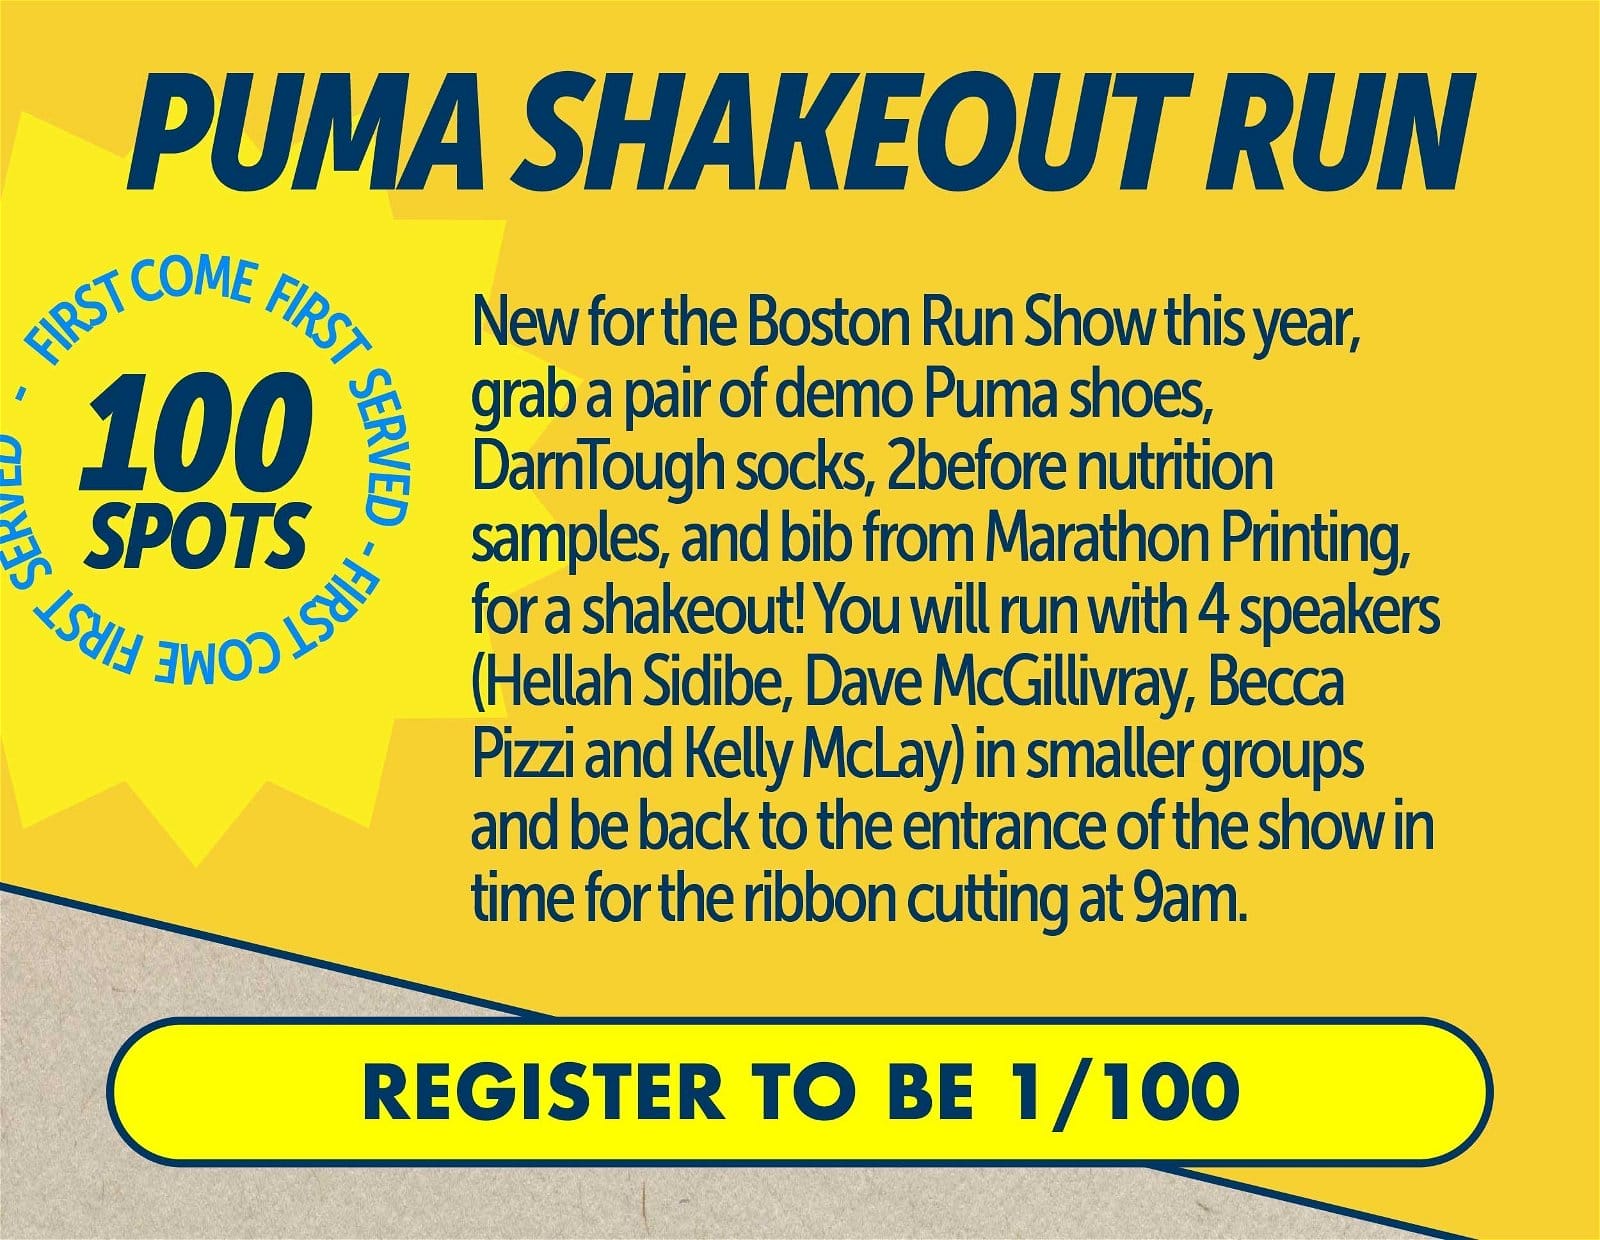 SIGN UP FOR SHAKEOUT RUN